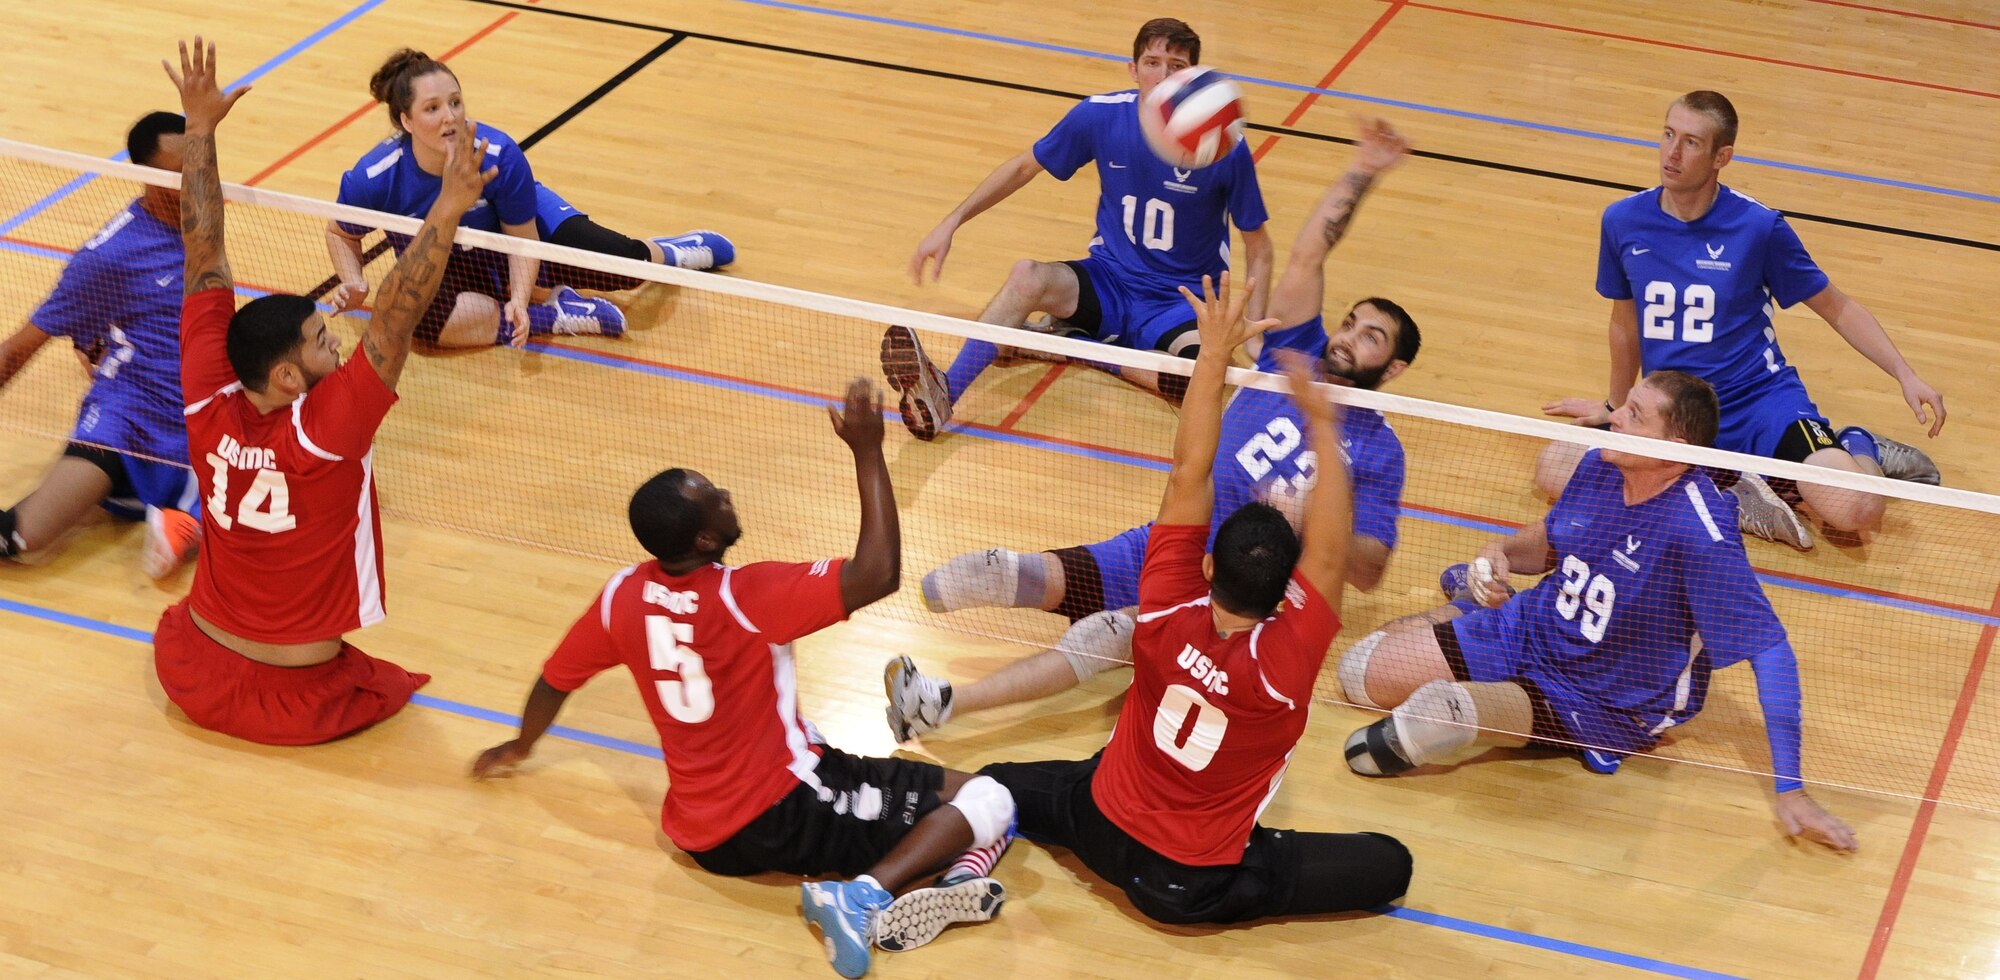 A member of the Air Force wounded warrior volleyball team spikes the ball during a volleyball match as part of the Warrior Care Month Sitting Volleyball Tournament at the Pentagon in Washington, D.C., Nov. 19, 2015. The Air Force Wounded Warrior Team won the match against the Marines, and went on to take home the trophy for the tournament. (U.S. Air Force photo/Staff Sgt. Whitney Stanfield)